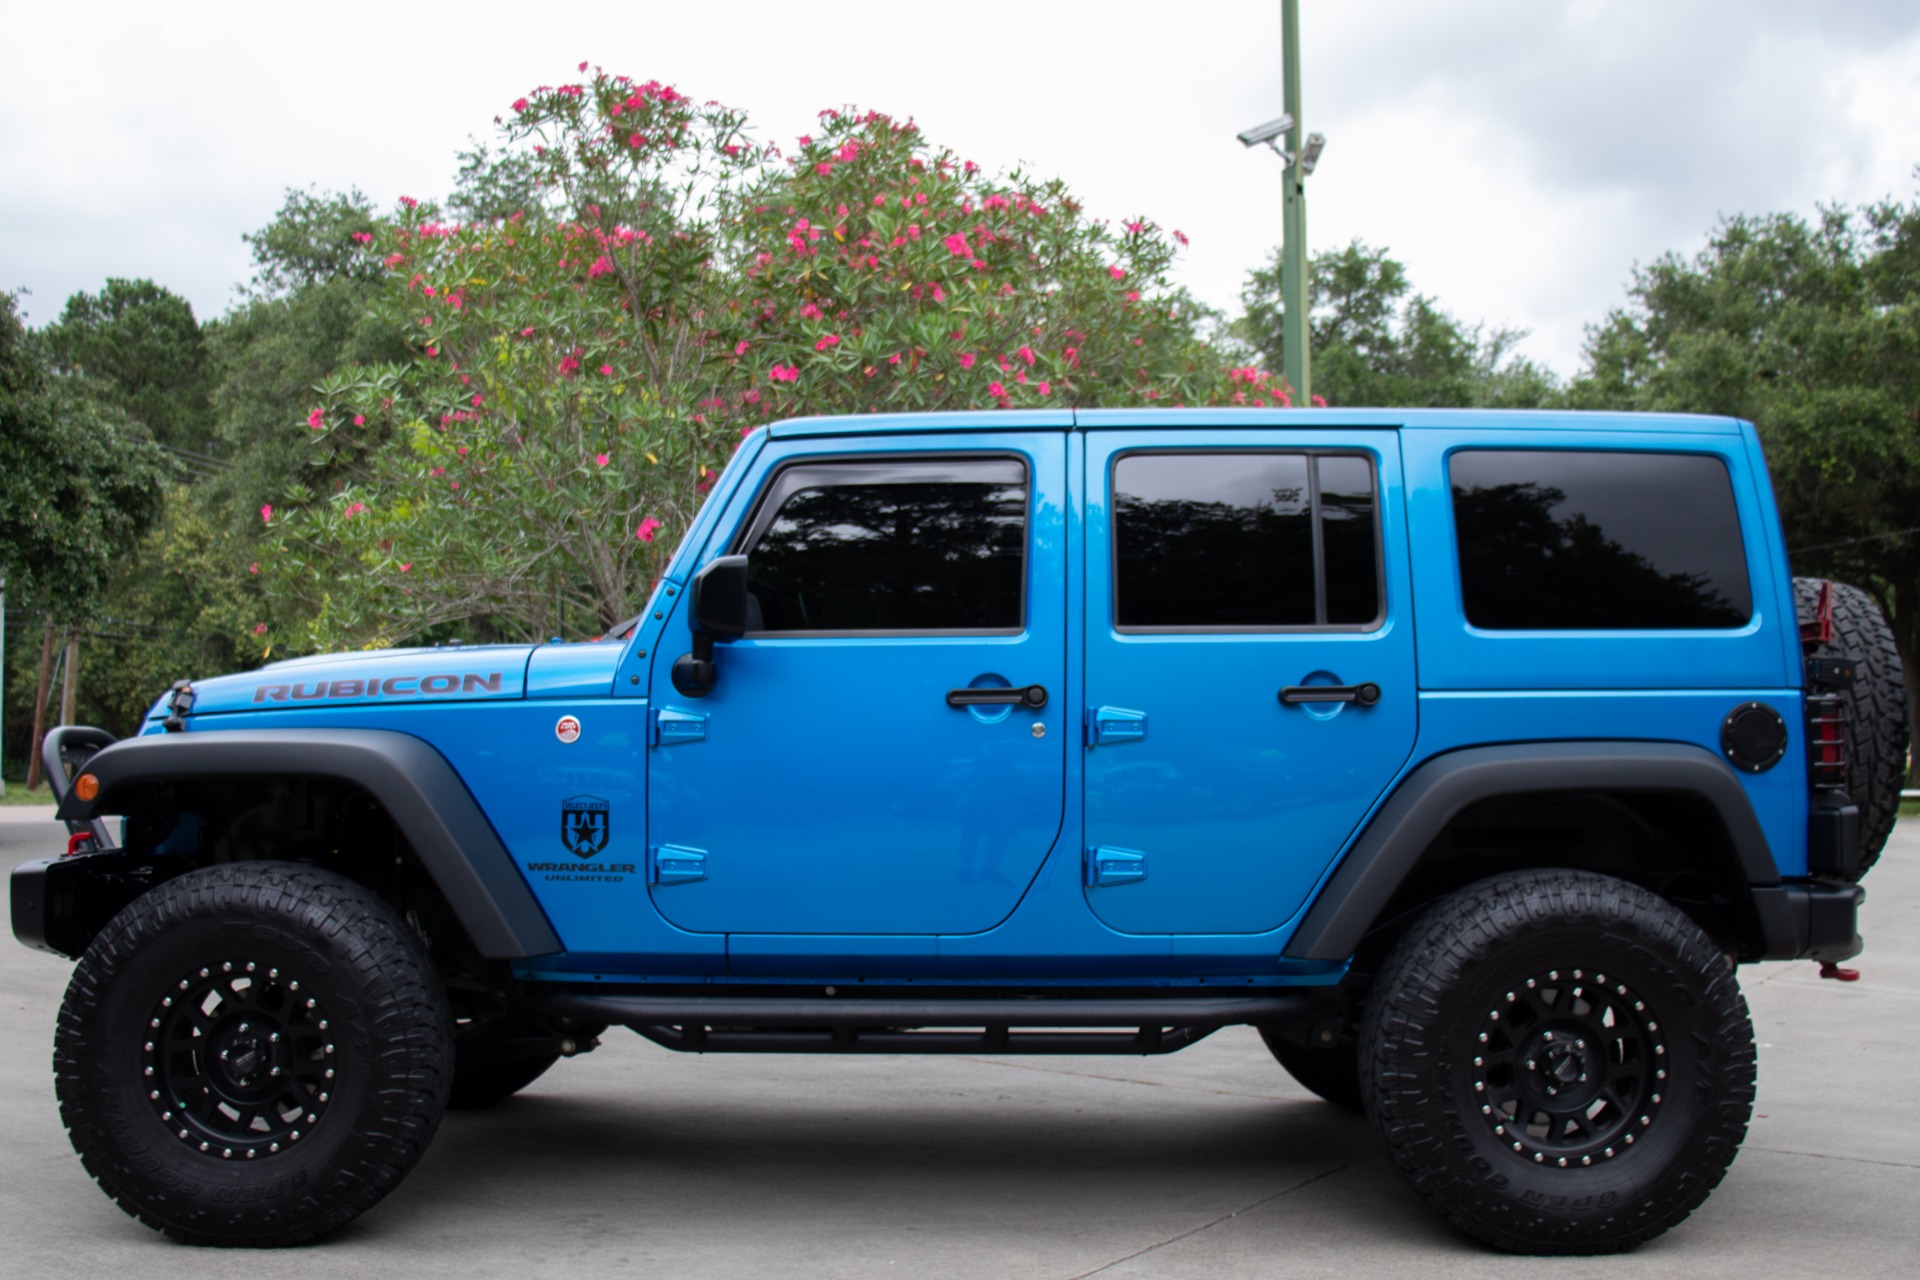 Used 2016 Jeep Wrangler Unlimited Rubicon Hard Rock For Sale ($37,995) |  Select Jeeps Inc. Stock #156815